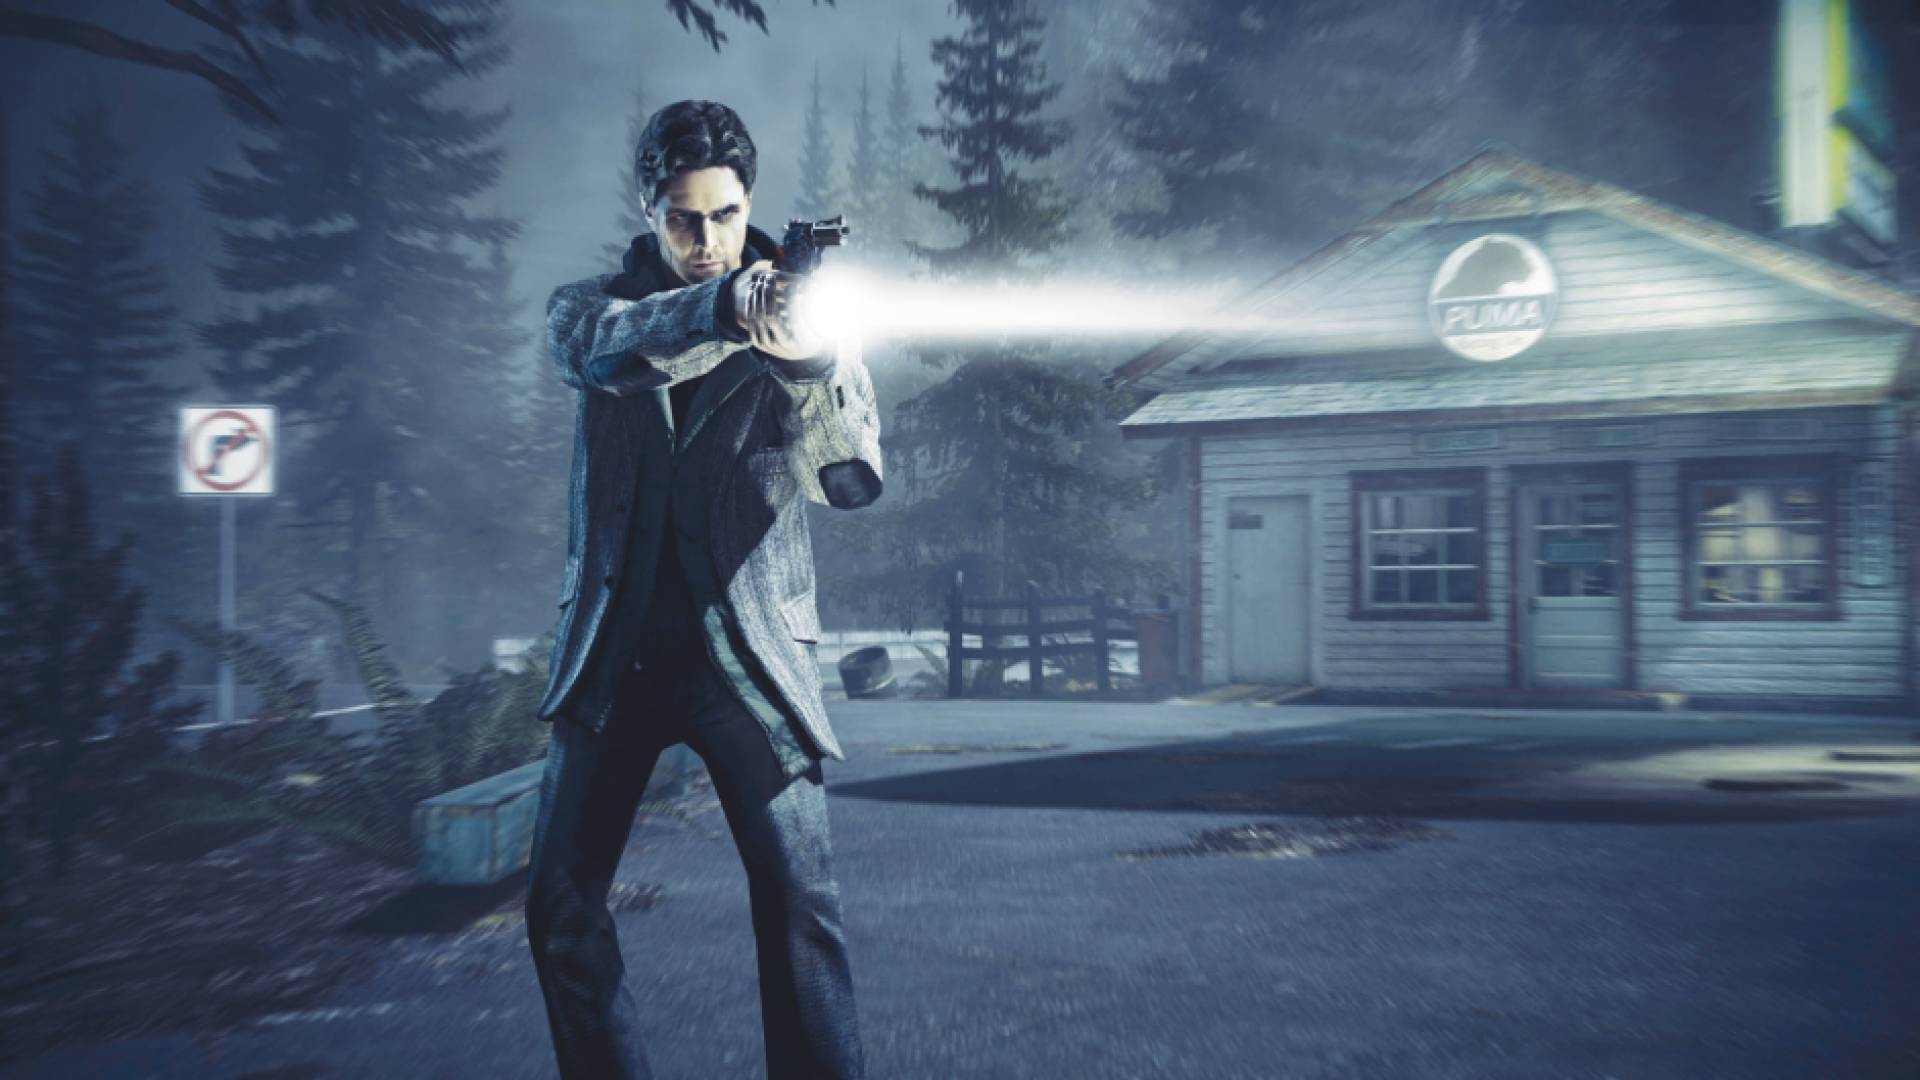 Alan Wake Remastered appears to be on the way